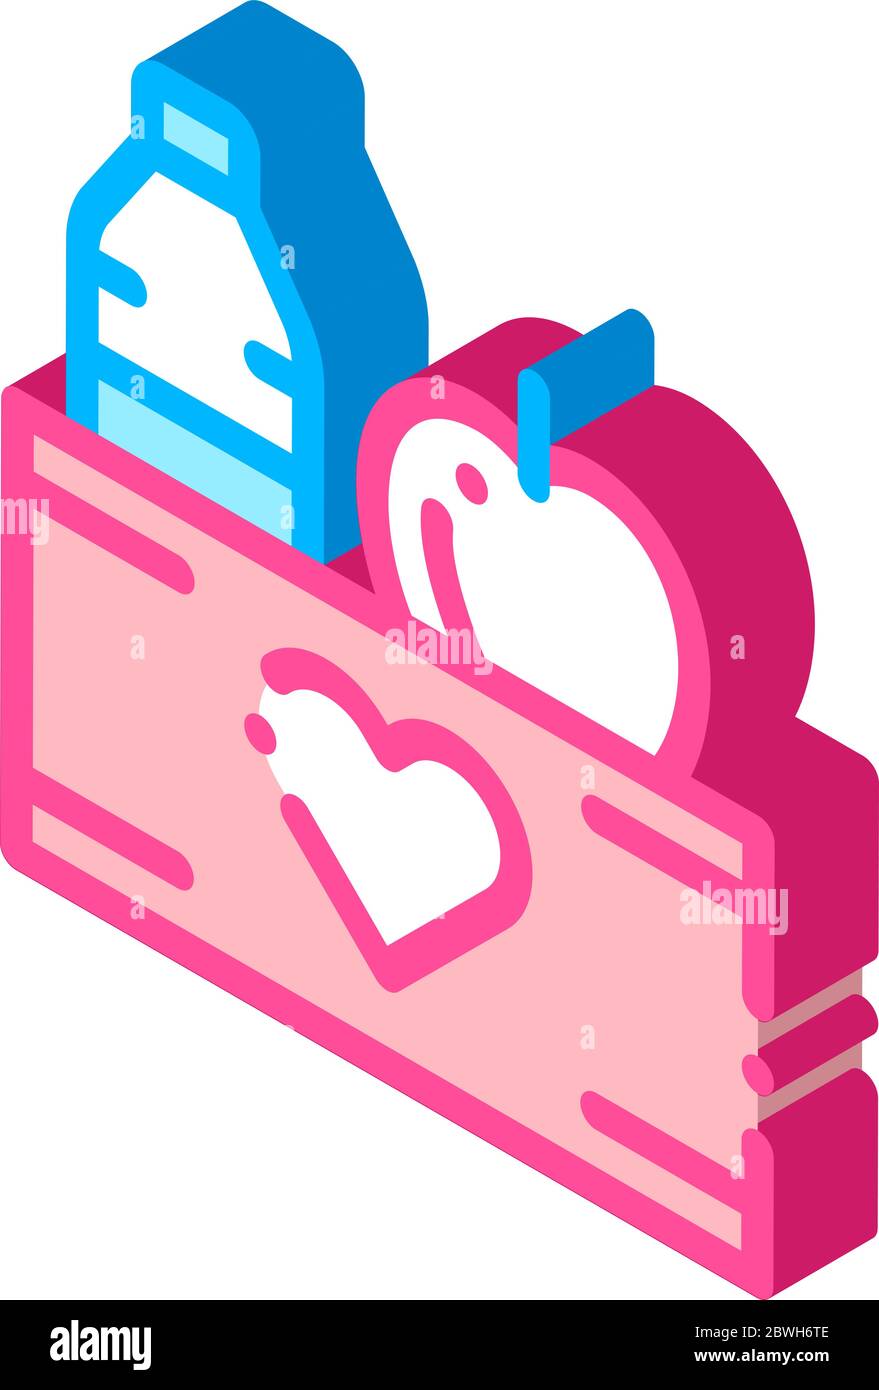 Volunteers Support Food Box isometric icon vector illustration Stock Vector